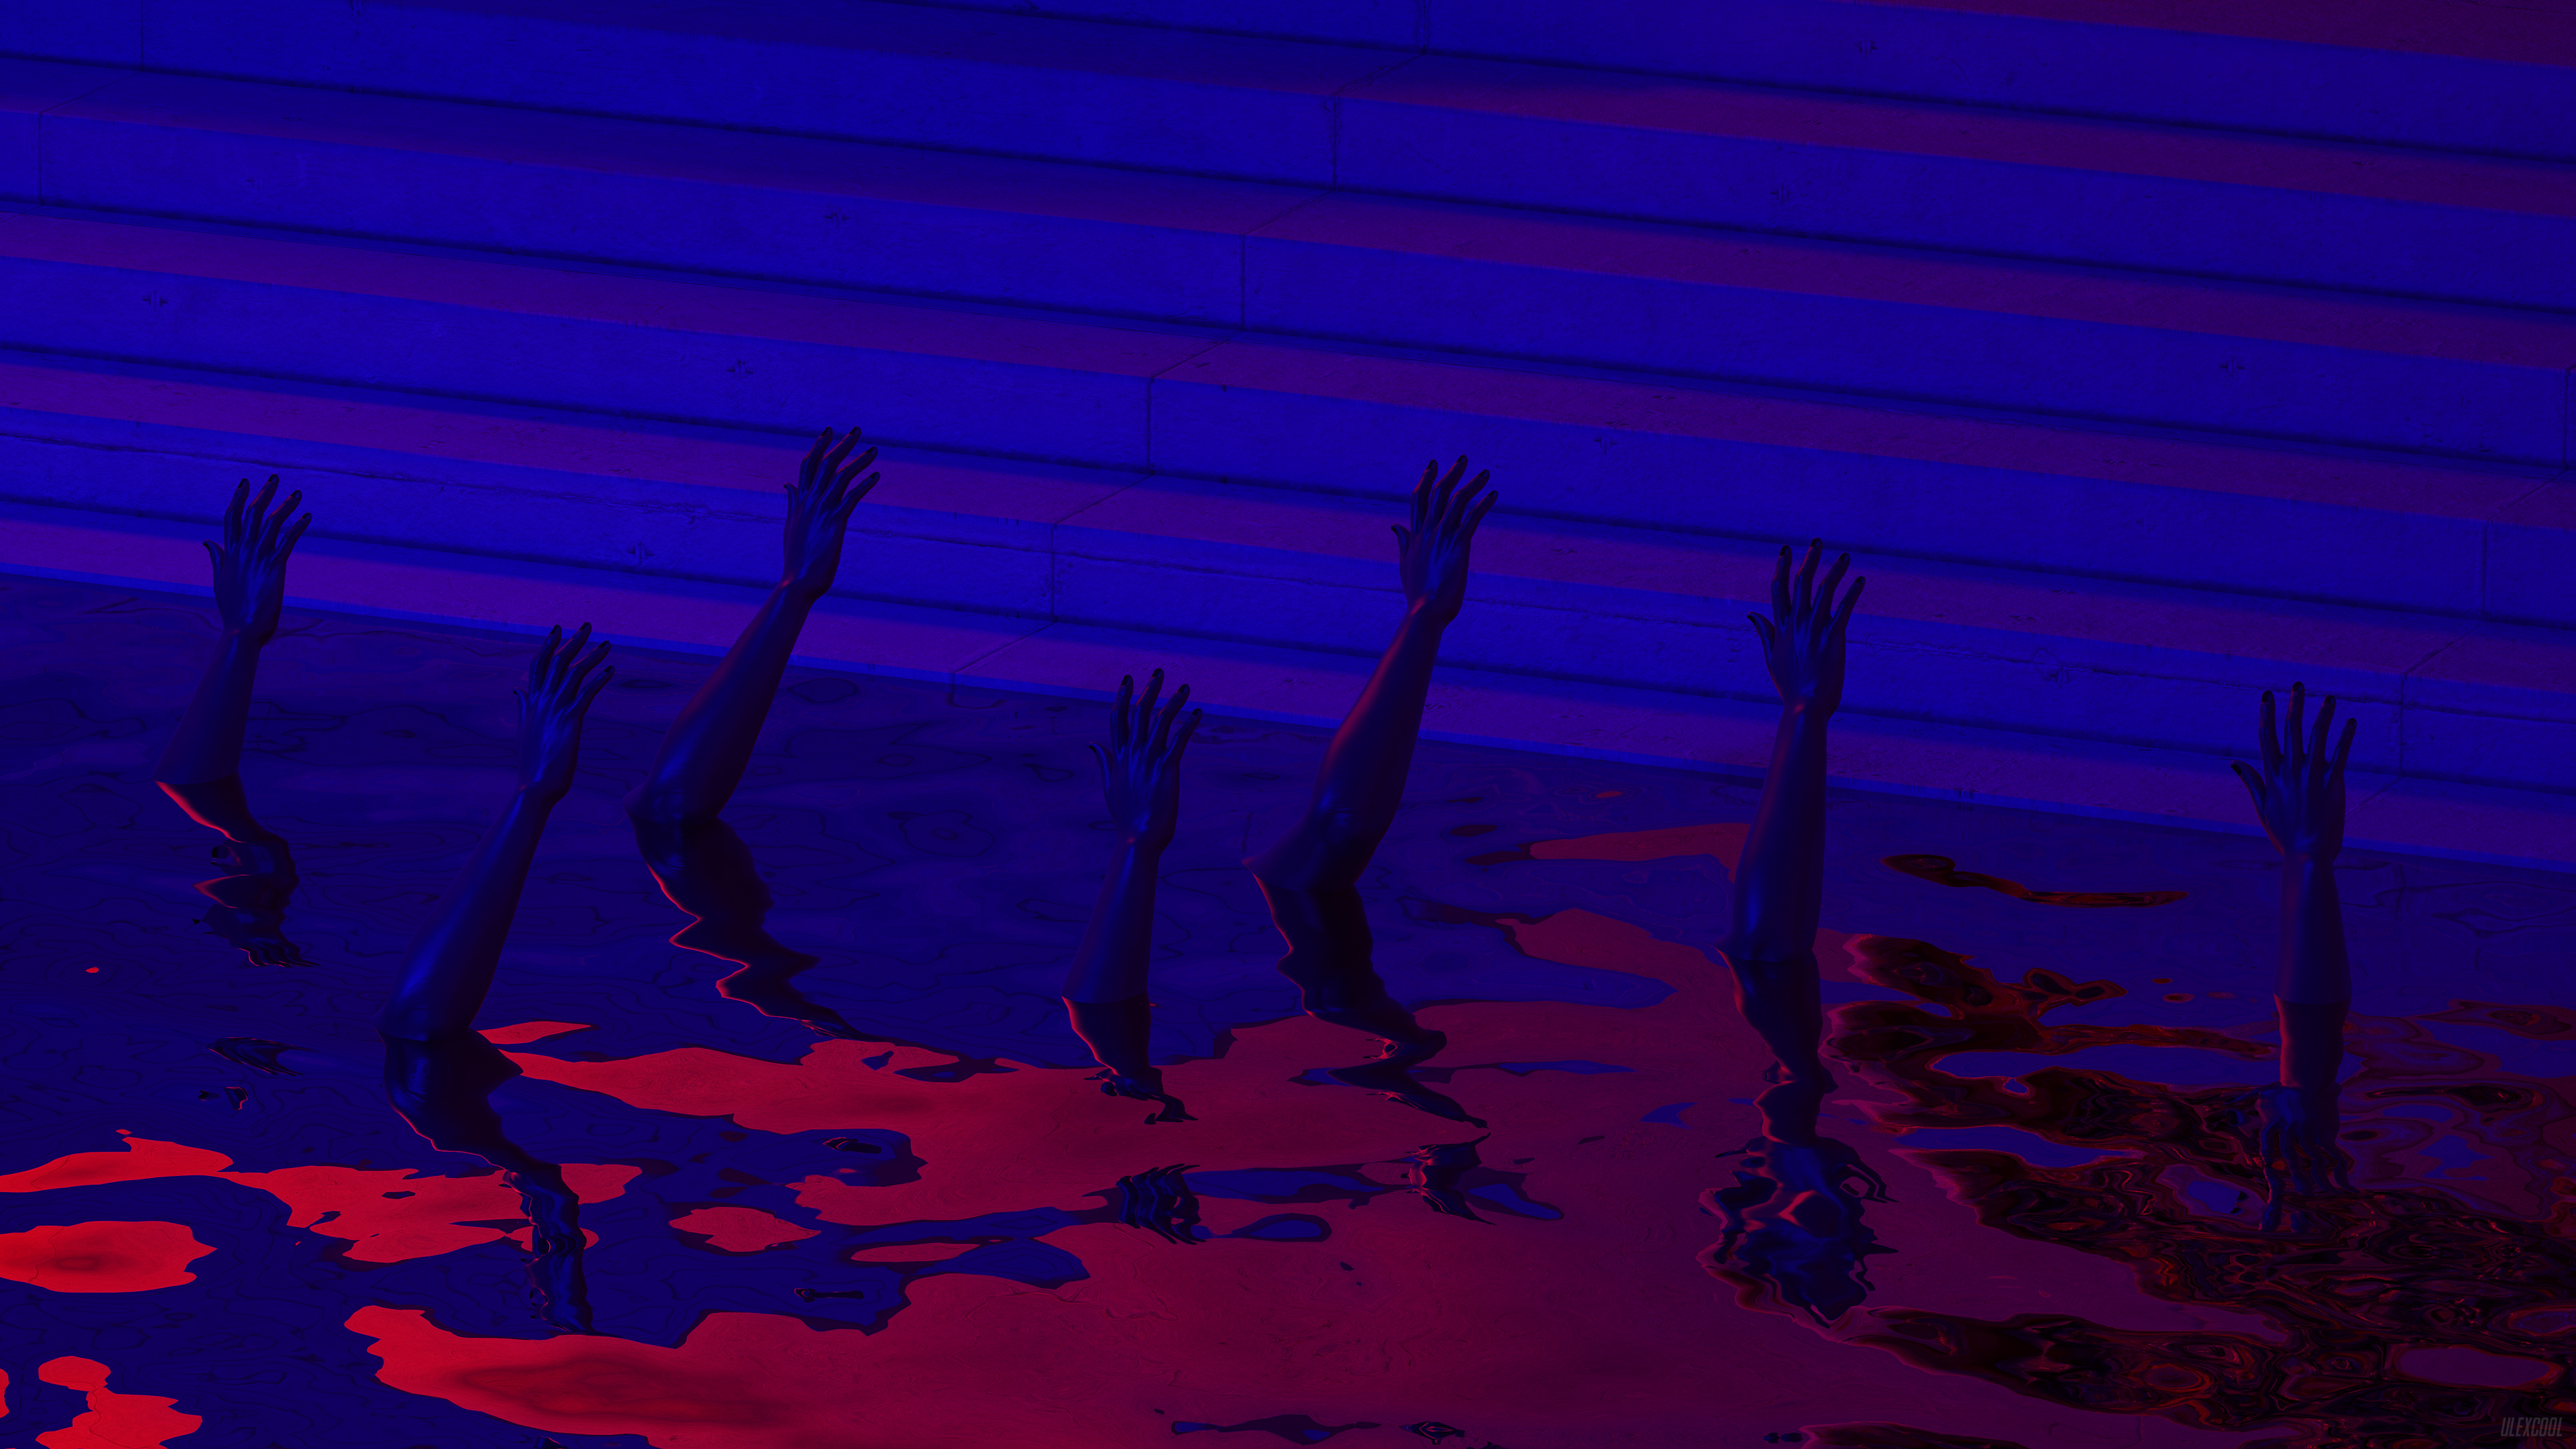 General 3840x2160 neon blue red water hands stairs reflection cult cultist arms digital art